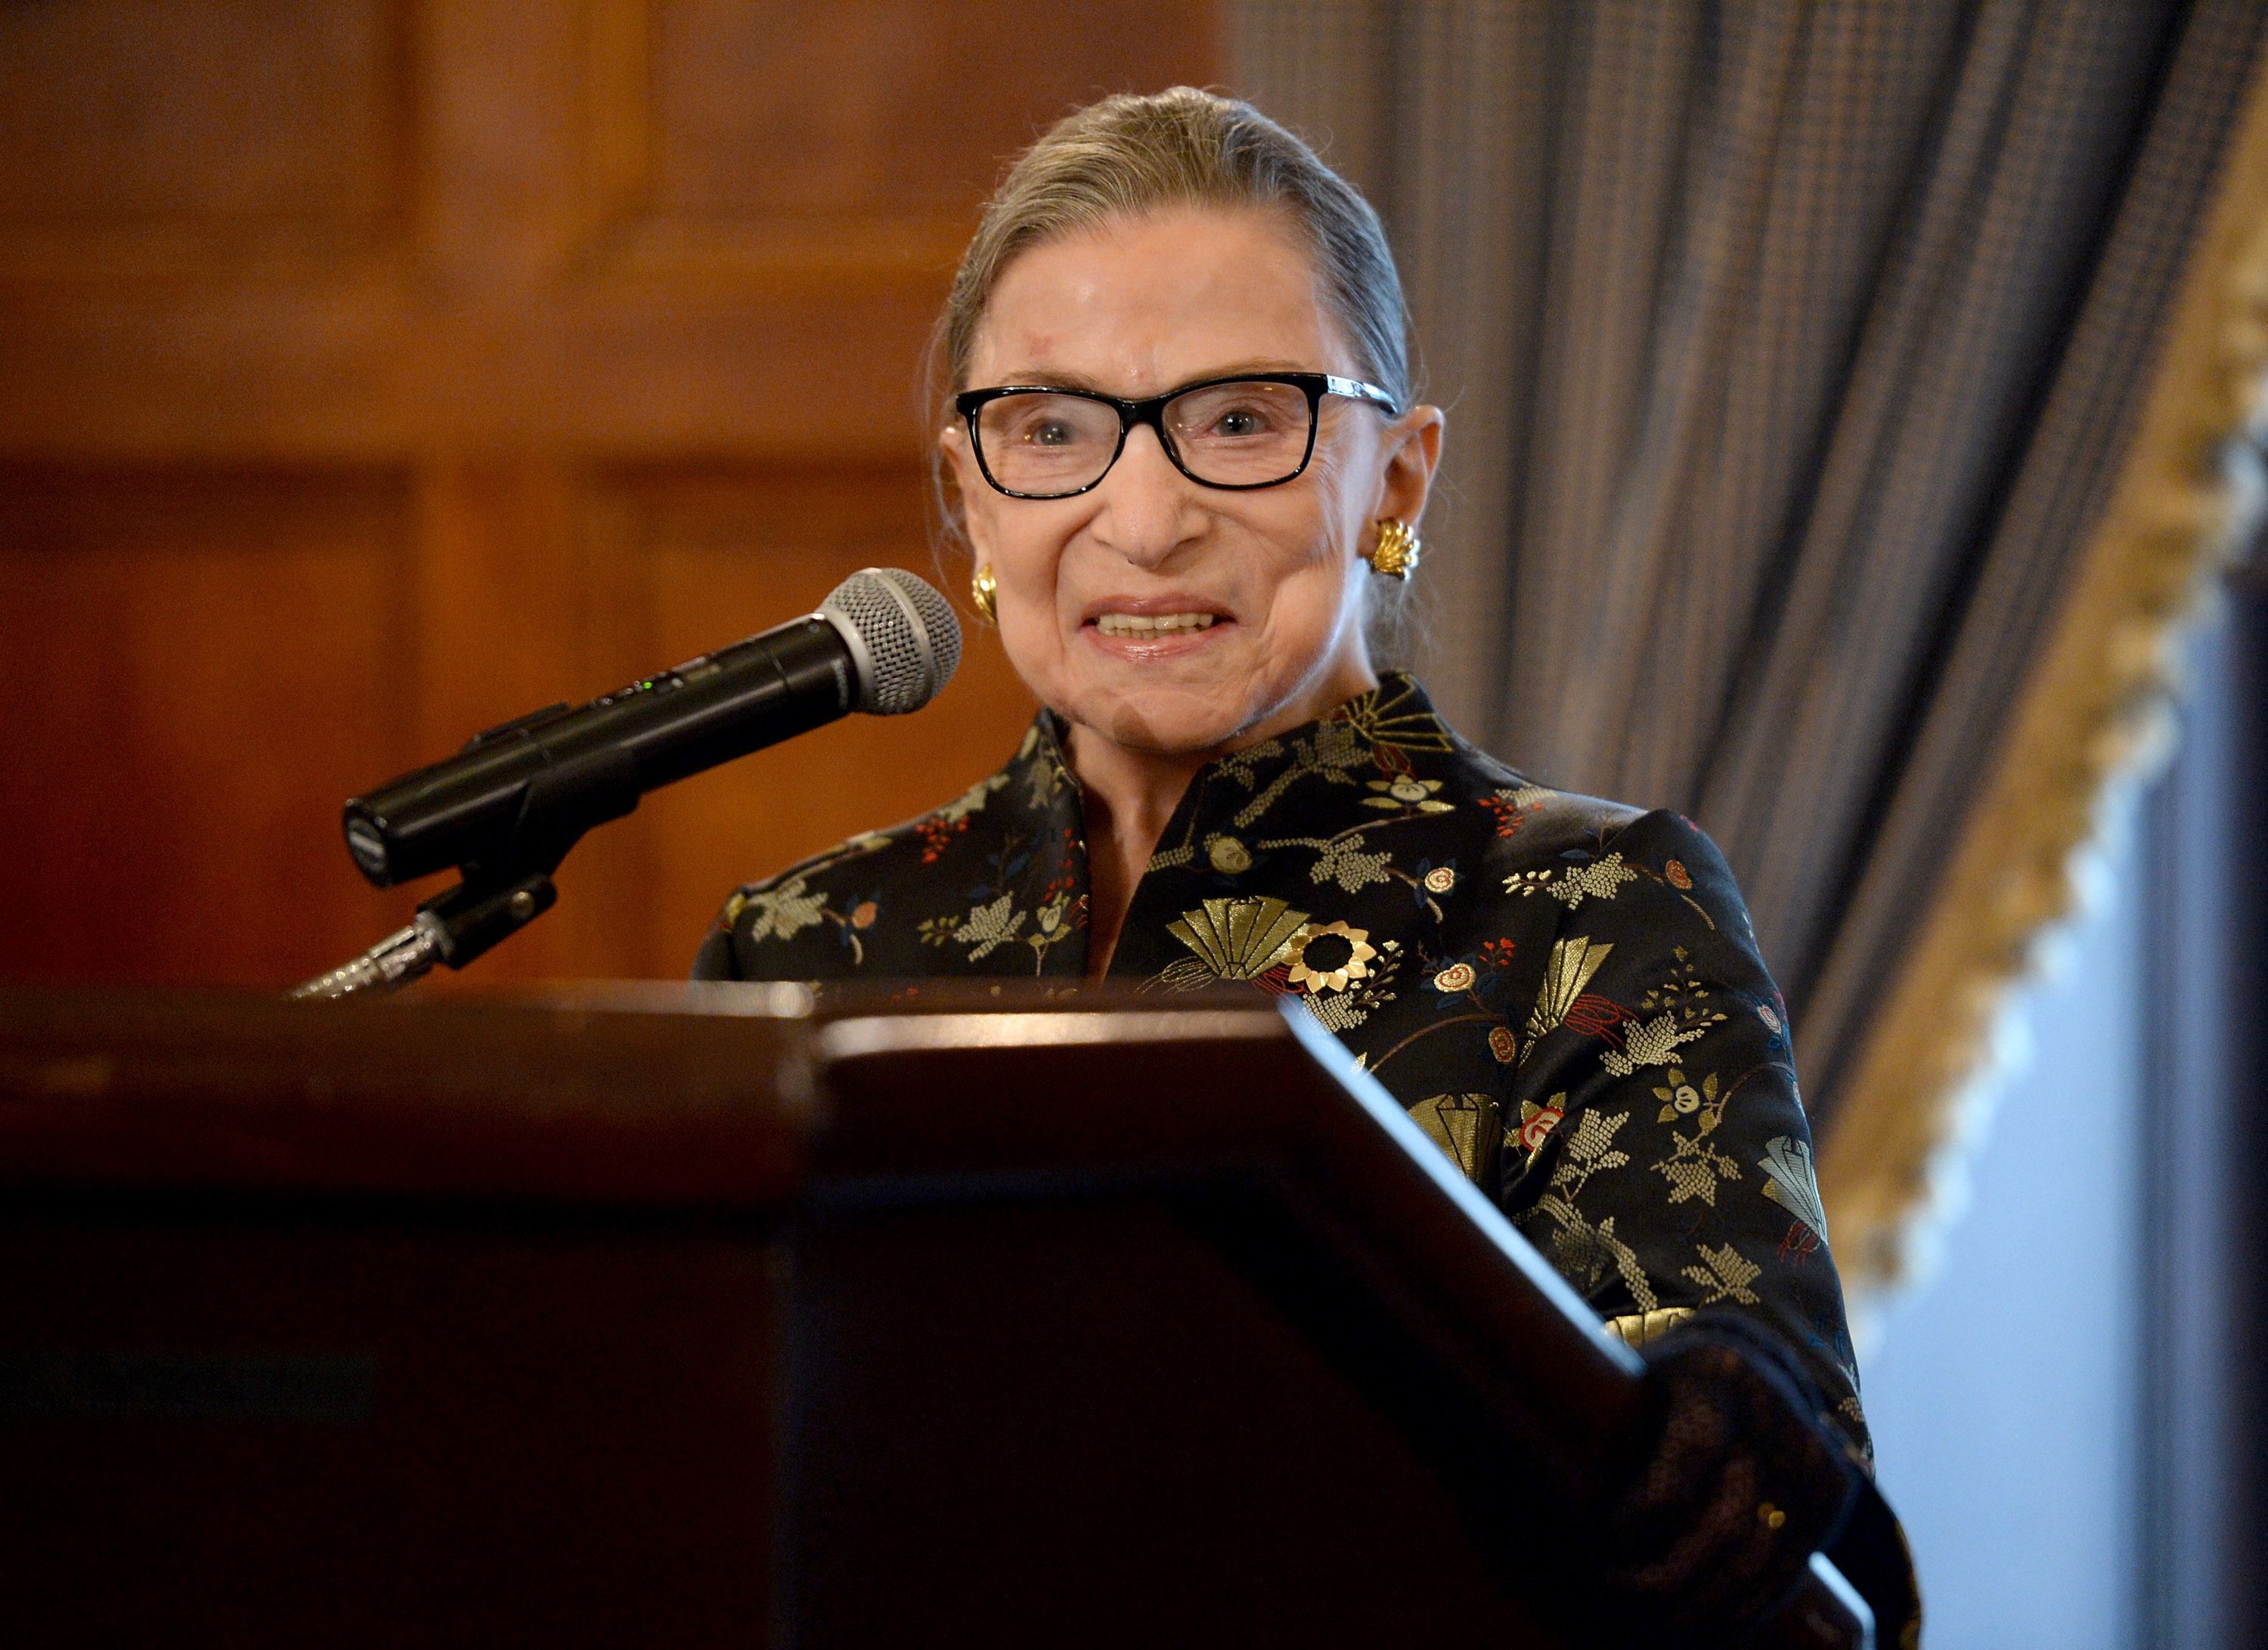 Supreme Court Justice Ruth Bader Ginsburg presents onstage at a reception before an event at the Temple Emanu-El Skirball Center on Sept. 21, 2016 in New York City. (Michael Kovac/Getty Images)